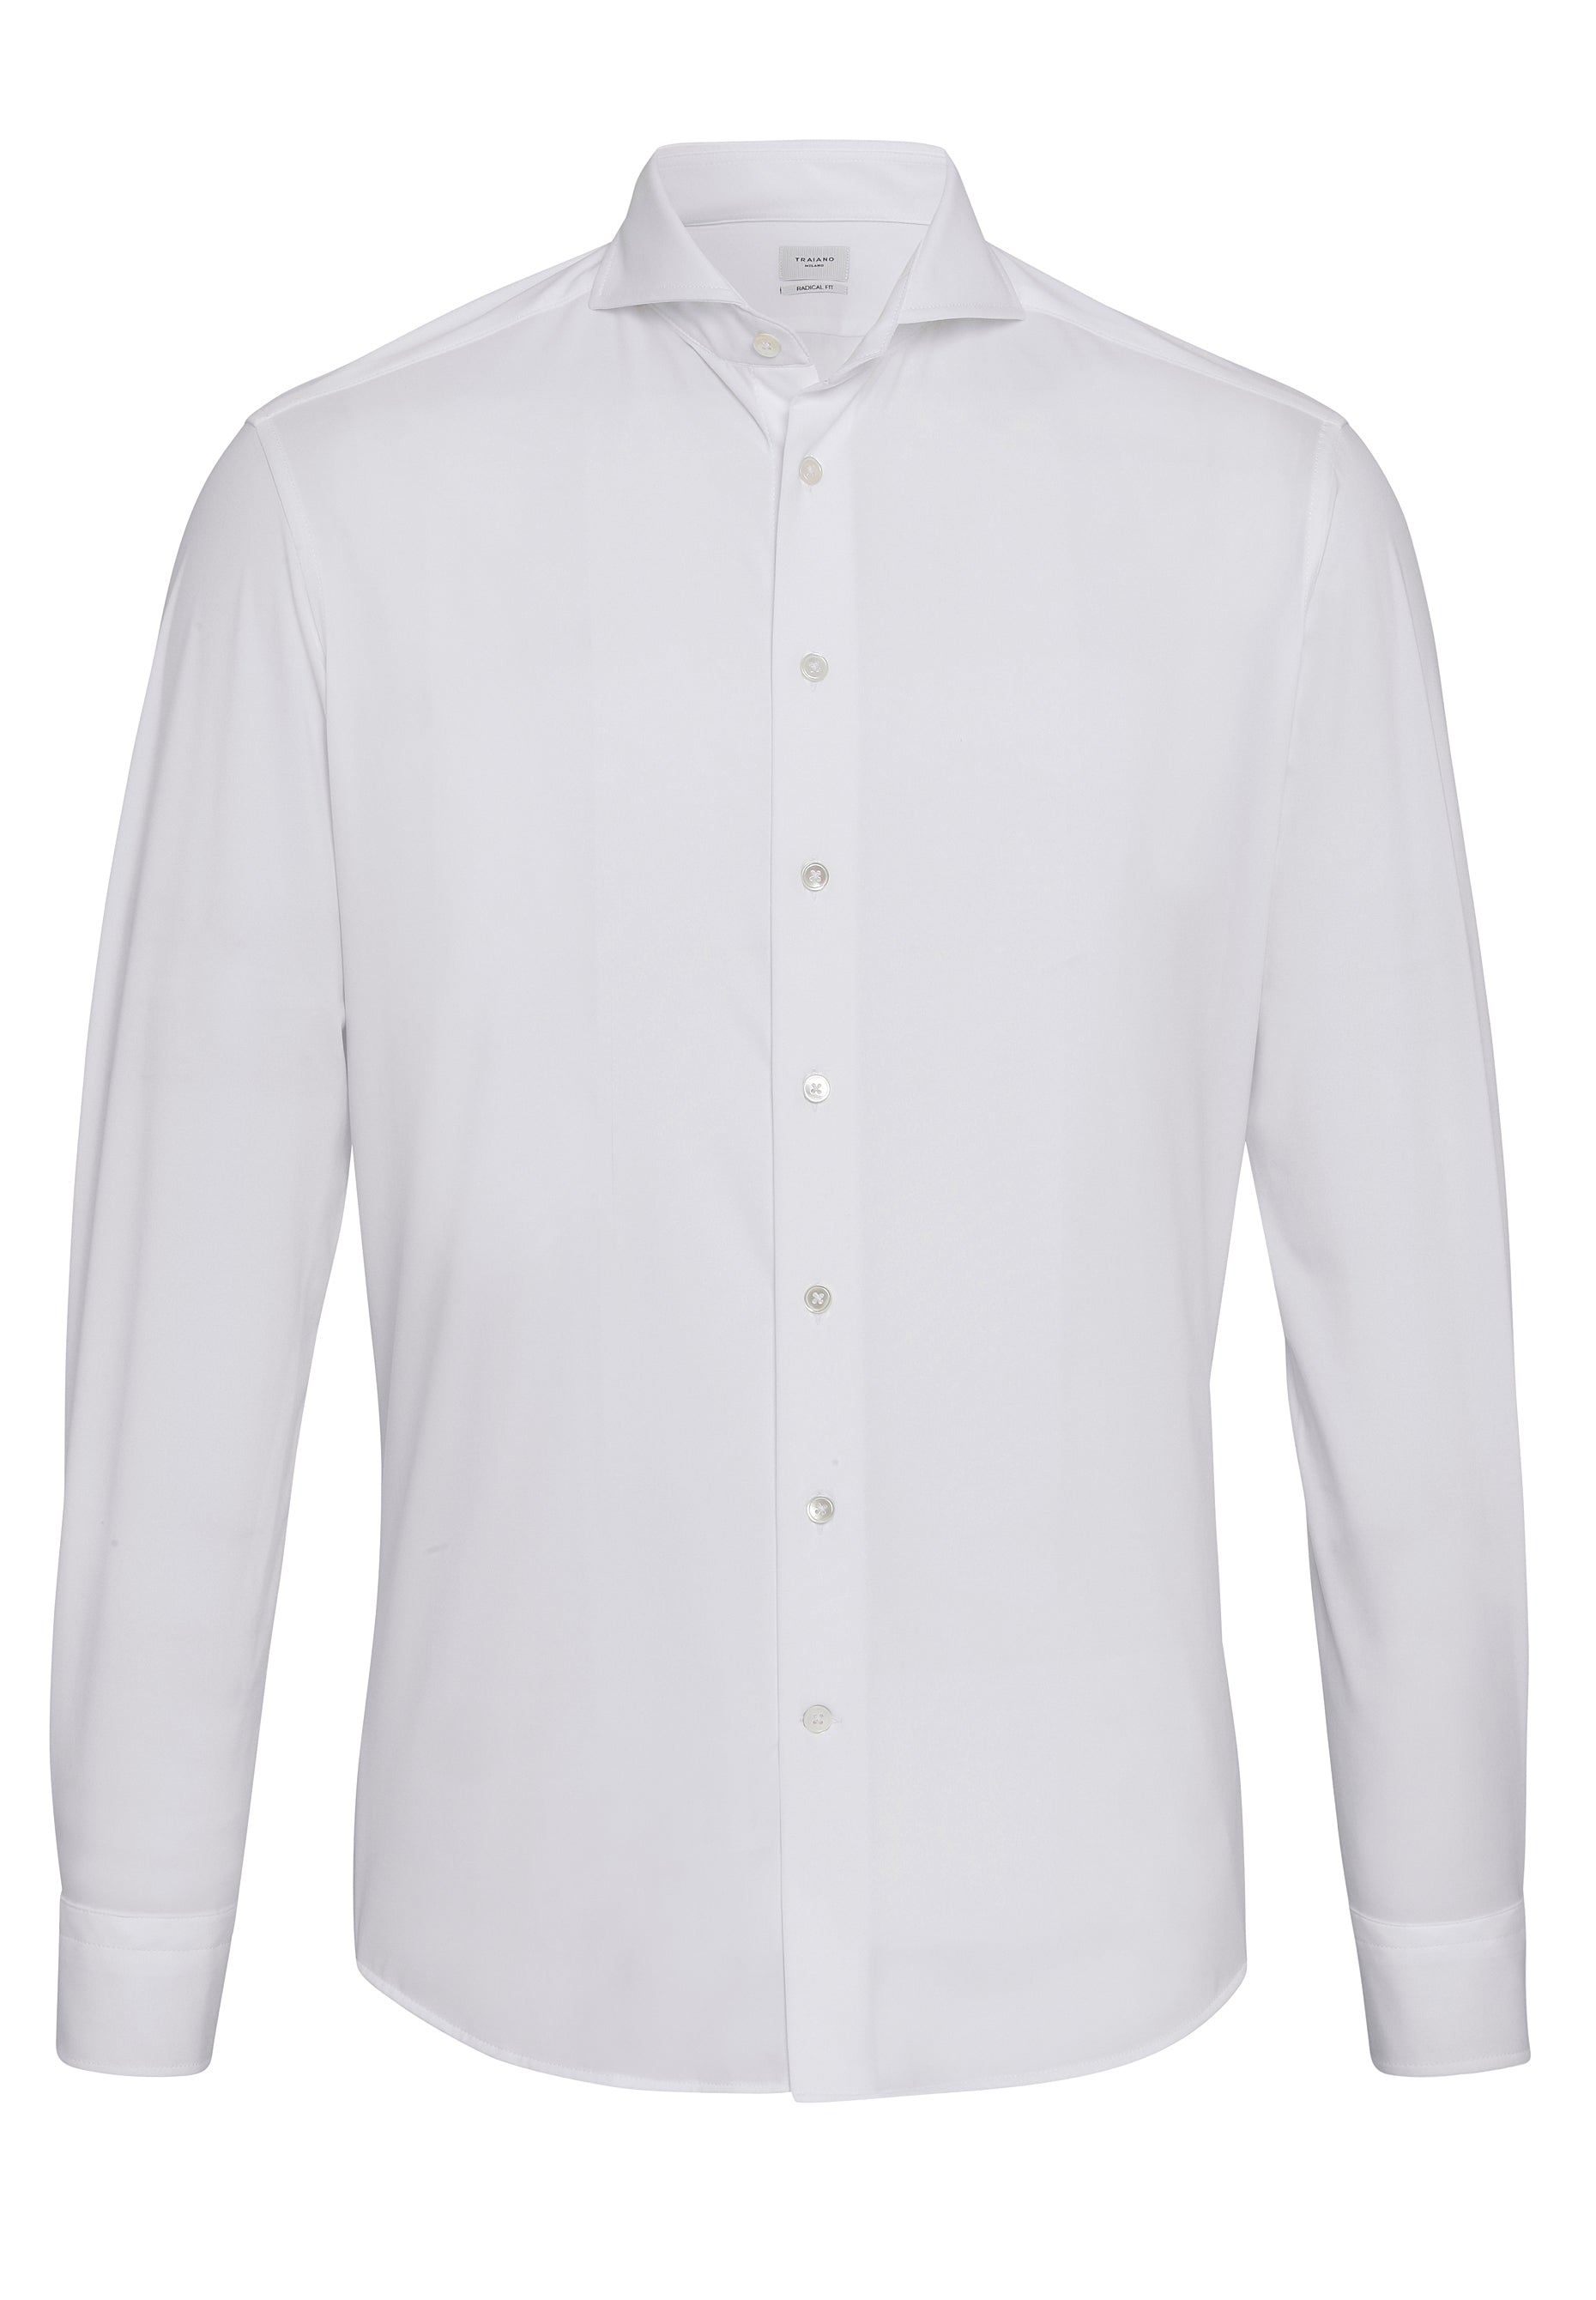 T1000-317 Traiano Vincent Radical Fit Shirt 900 white uni